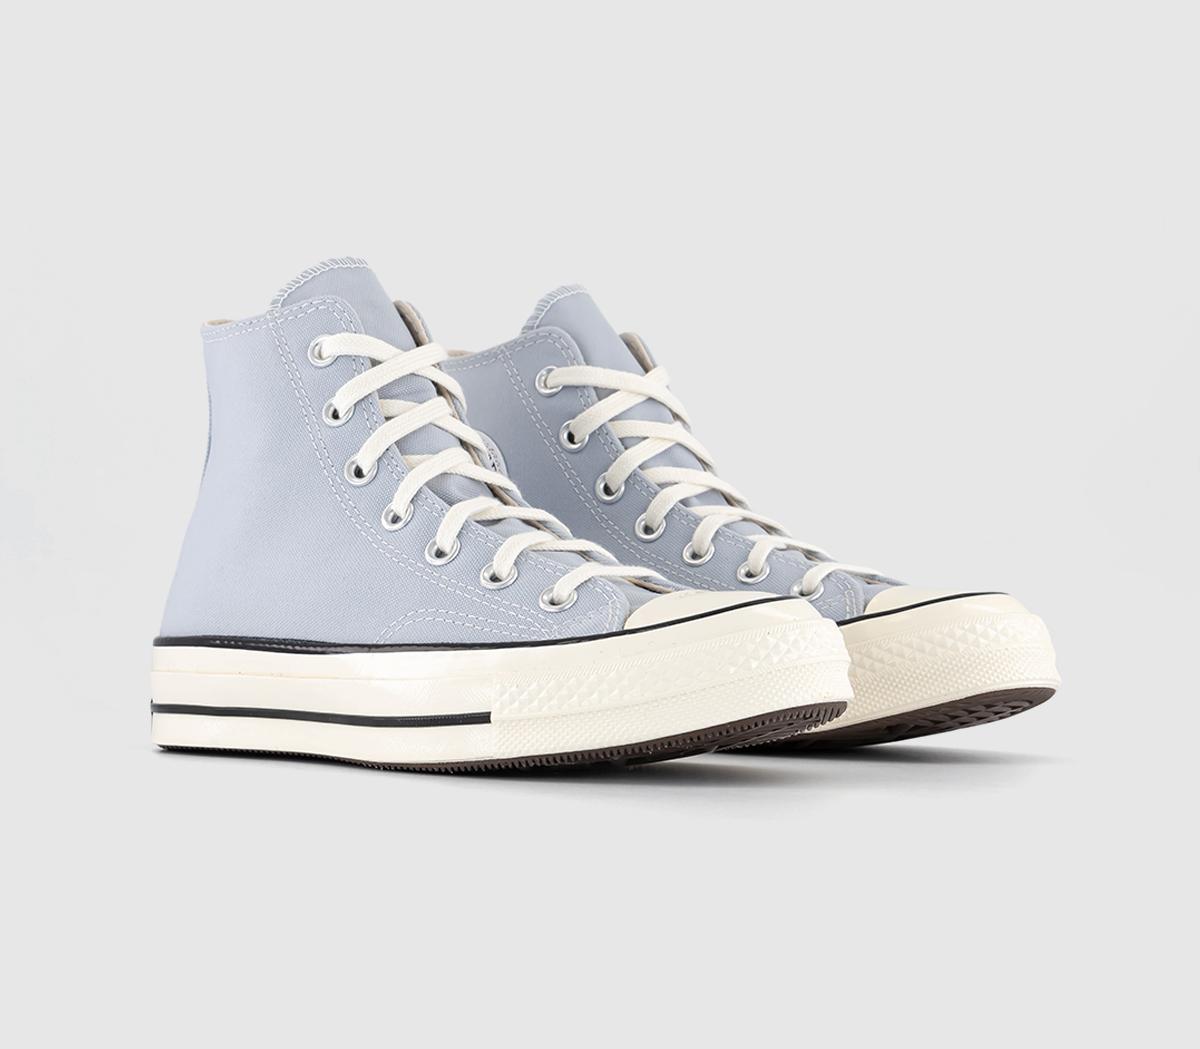 Converse All Star Hi 70 Trainers Ghosted Egret Black, 9